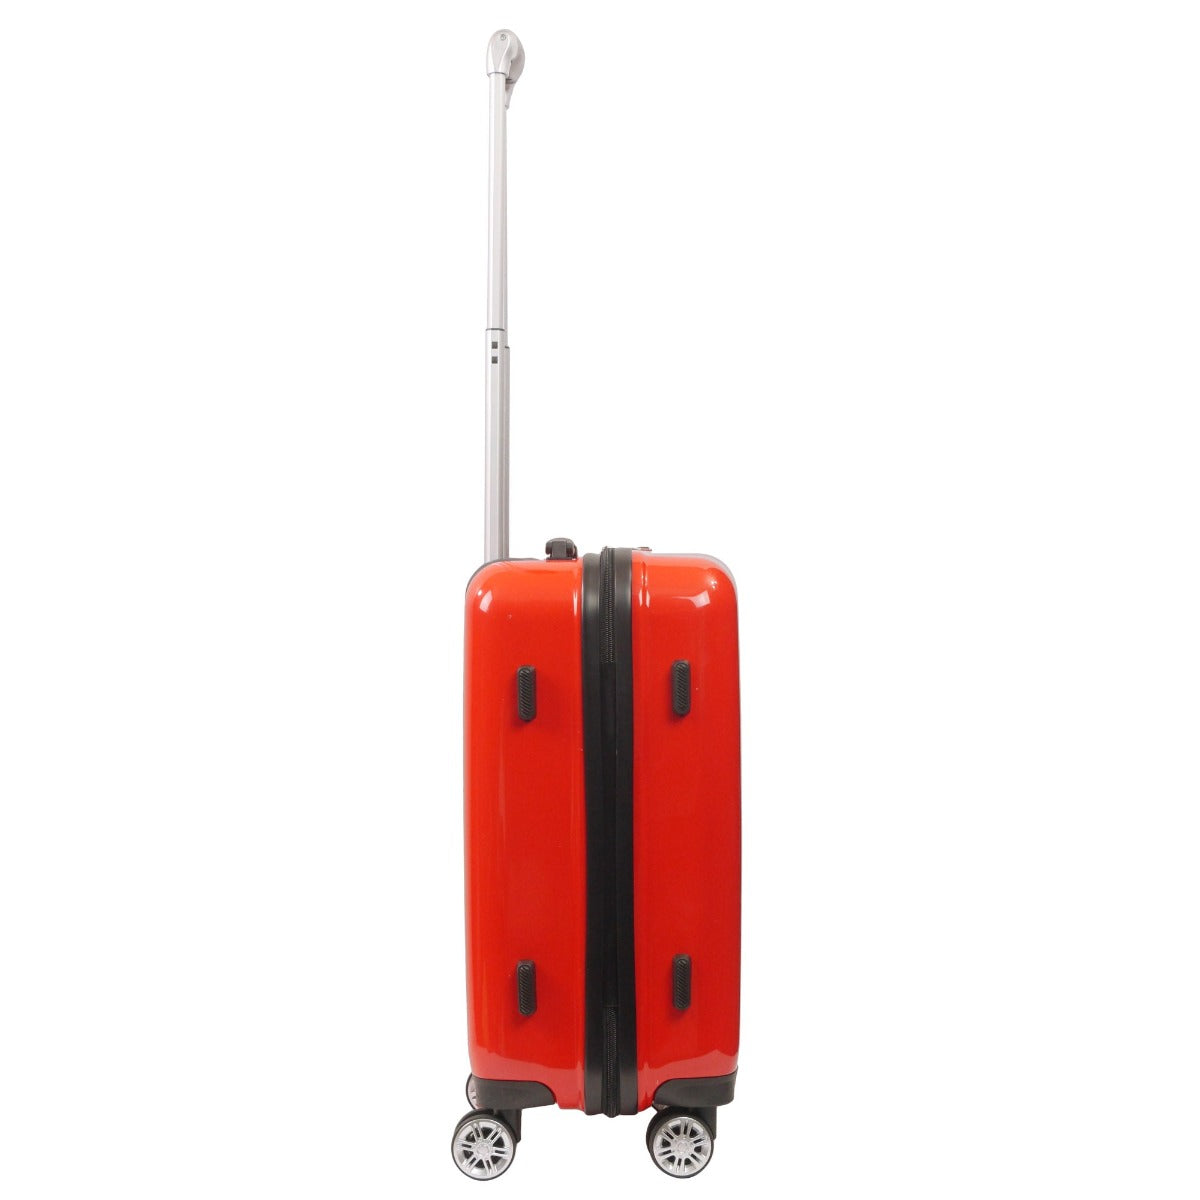 Ful Coca Cola 21" carry on hardside spinner suitcase suitcases - best carry on luggage for travelling